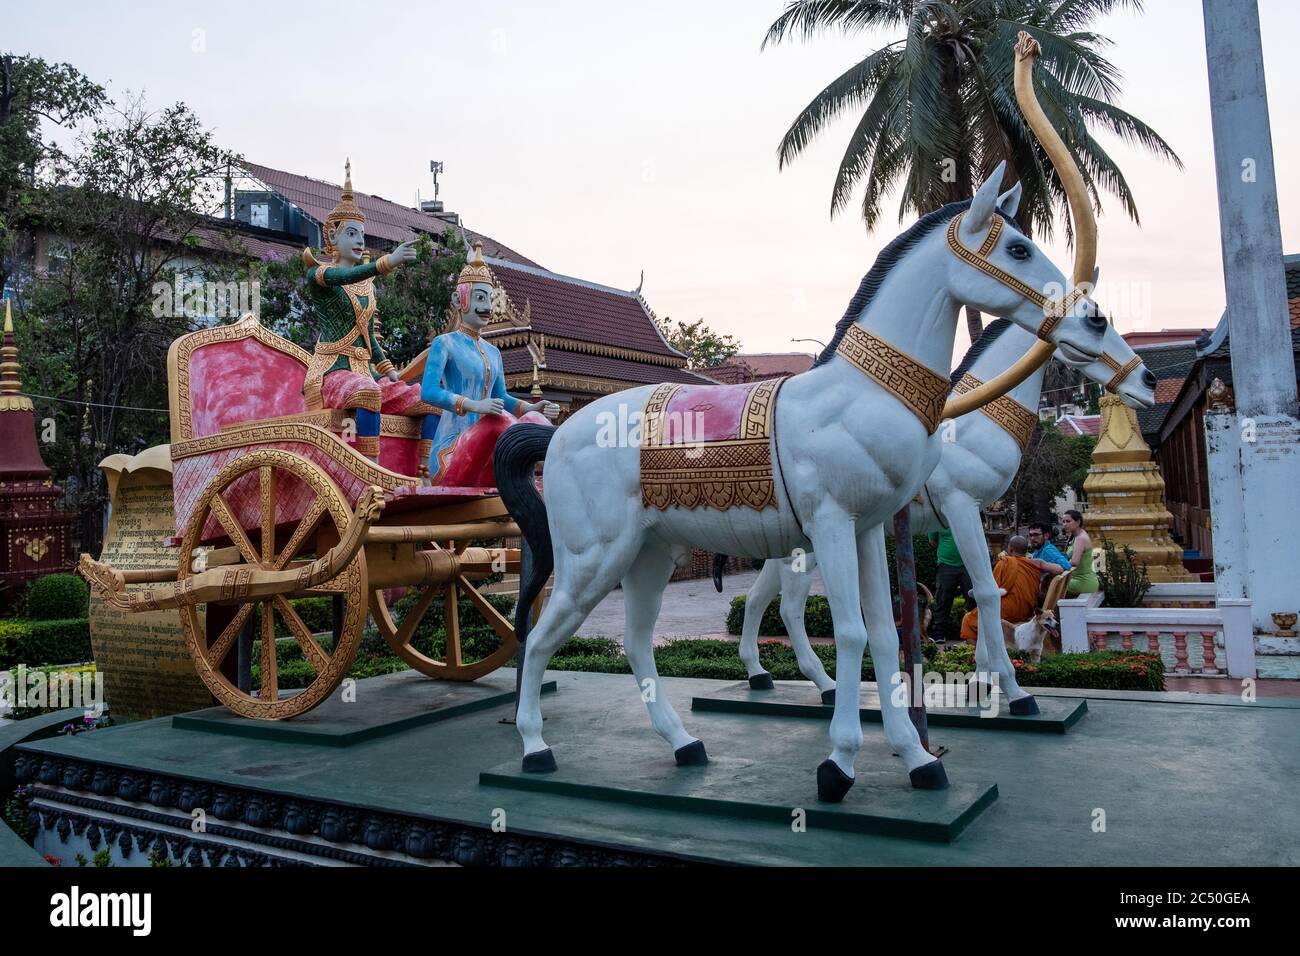 Corpse and Chariot, Wat Preah Prom Rath, Siem Reap, Cambodia Stock Photo